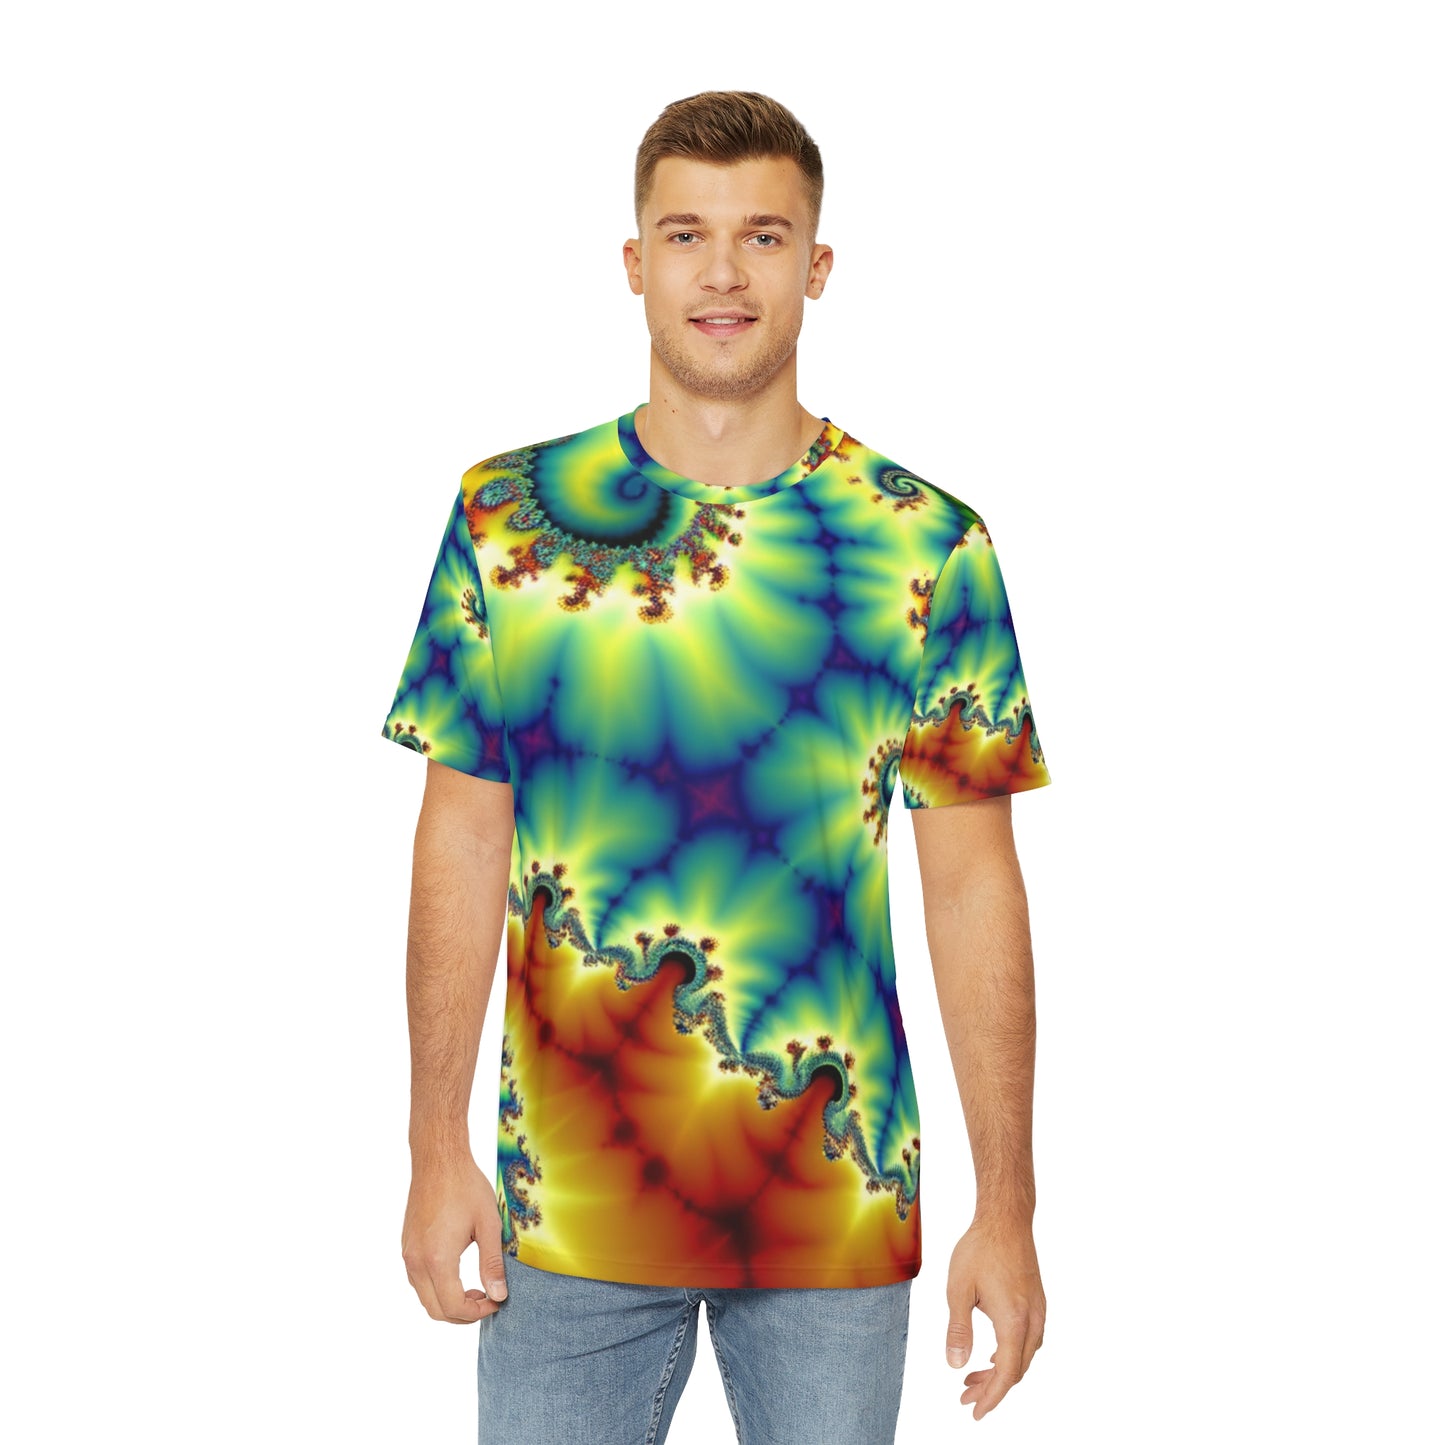 Front view of the Spectral Helix Dreamatorium Crewneck Pullover All-Over Print Short-Sleeved Shirt yellow oranger red blue green purple spectral pattern paired with casual denim pants worn  by a white man